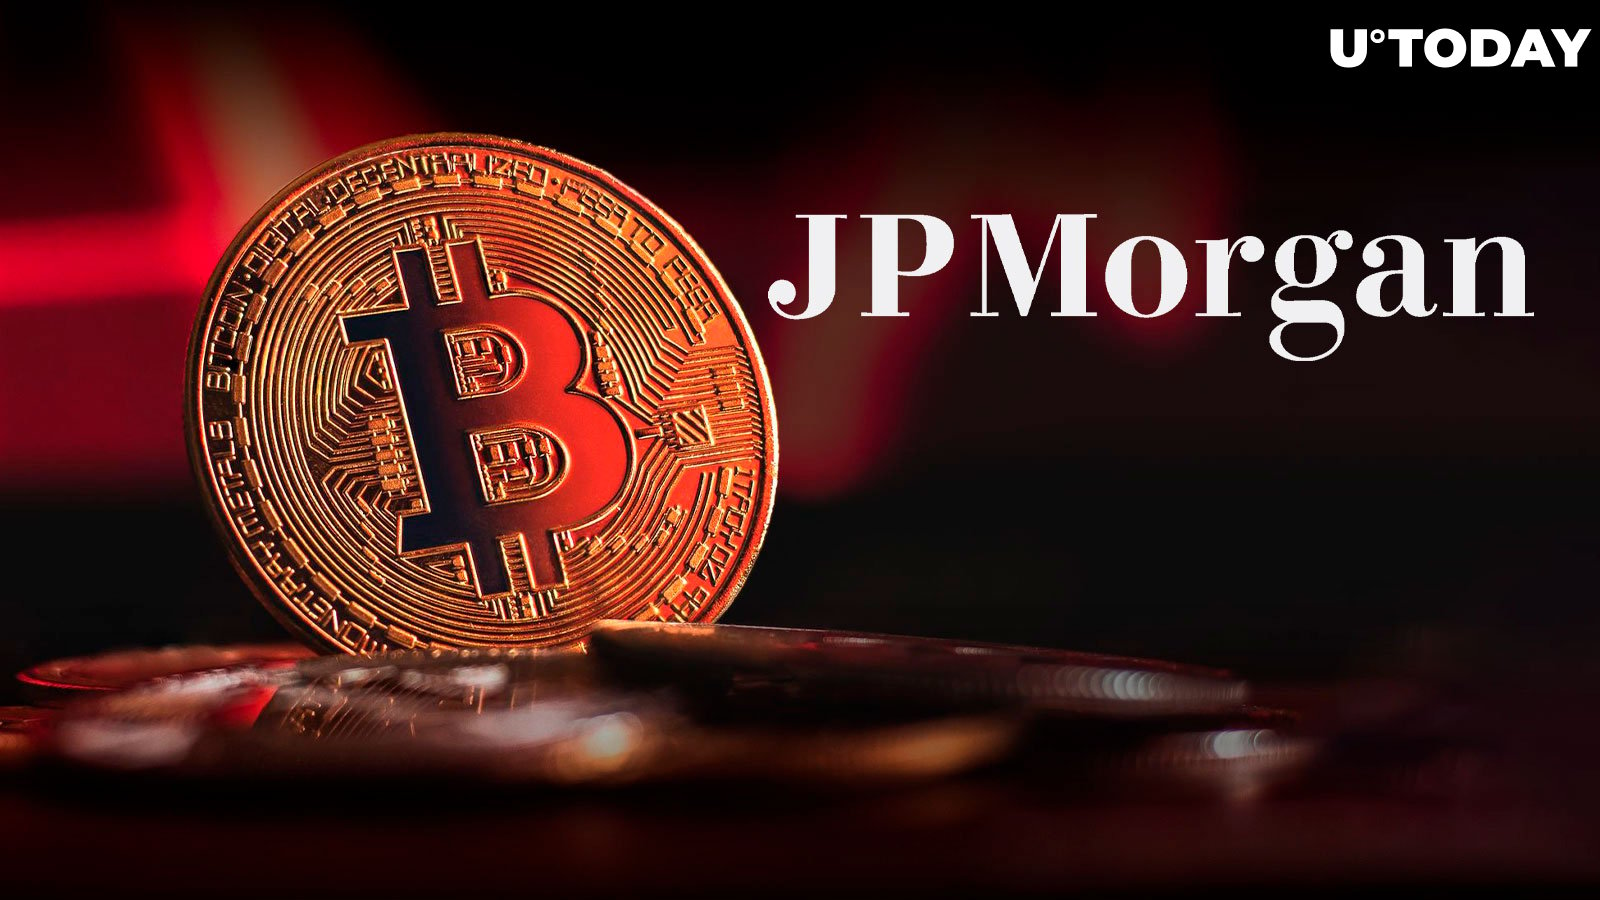 JPMorgan Issues Major Bitcoin Warning as BTC Price Plunges